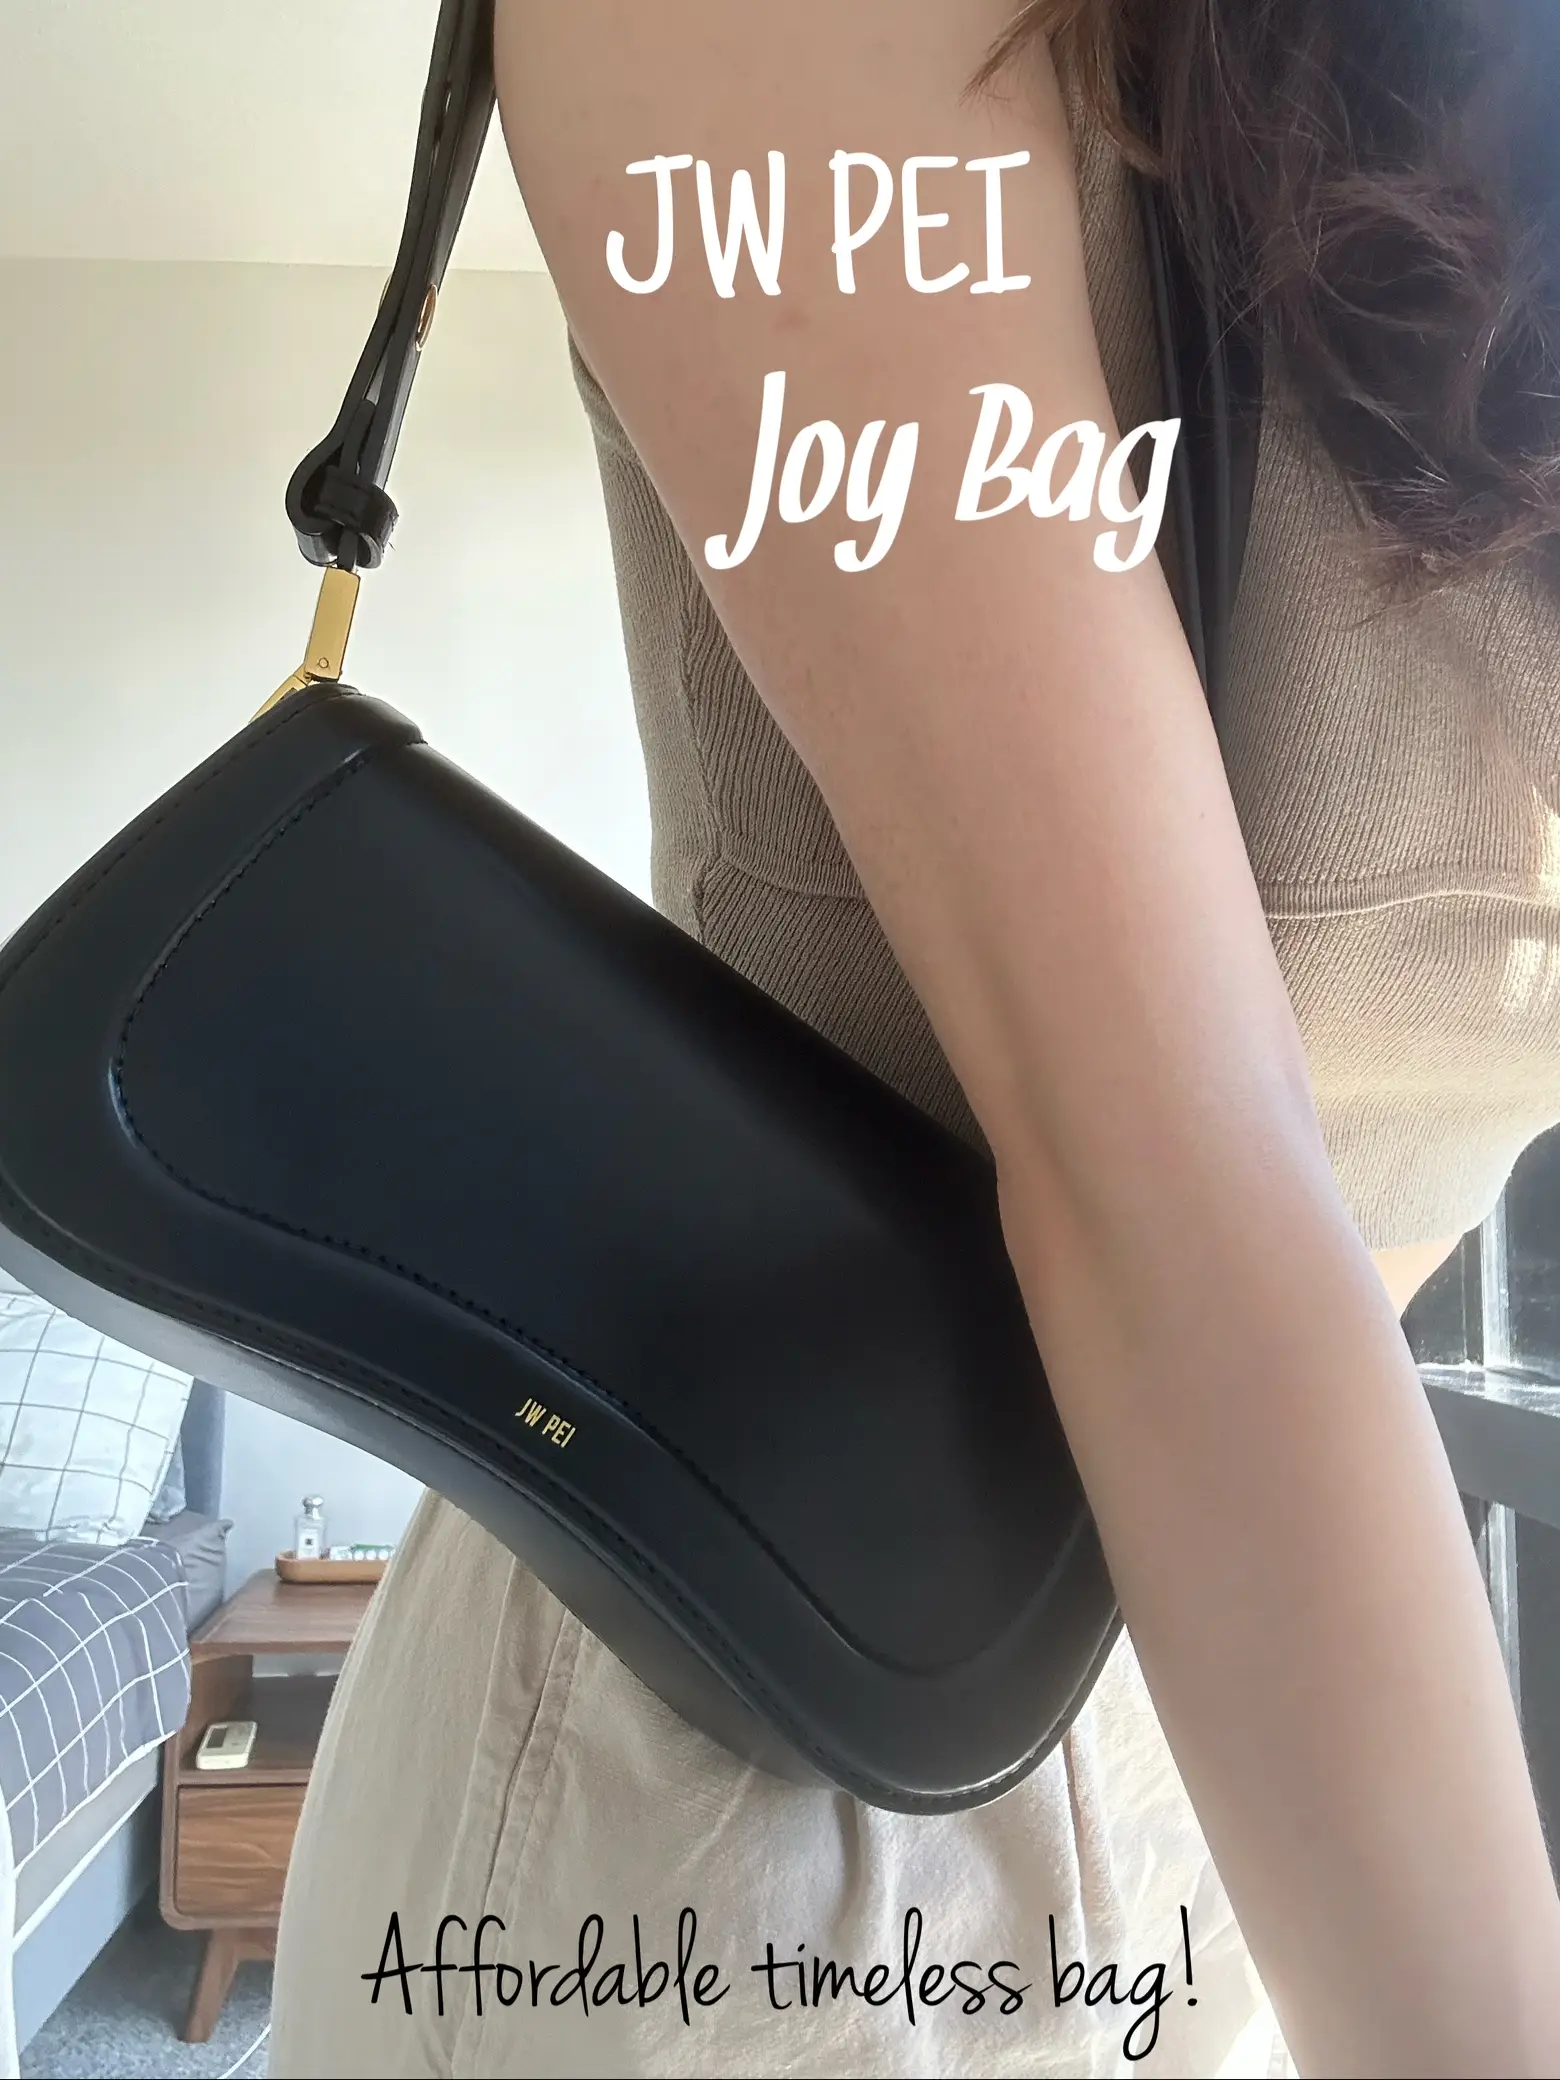 This JW Pei Bag Lookalike Is Finally Back In Stock and It's Under $15